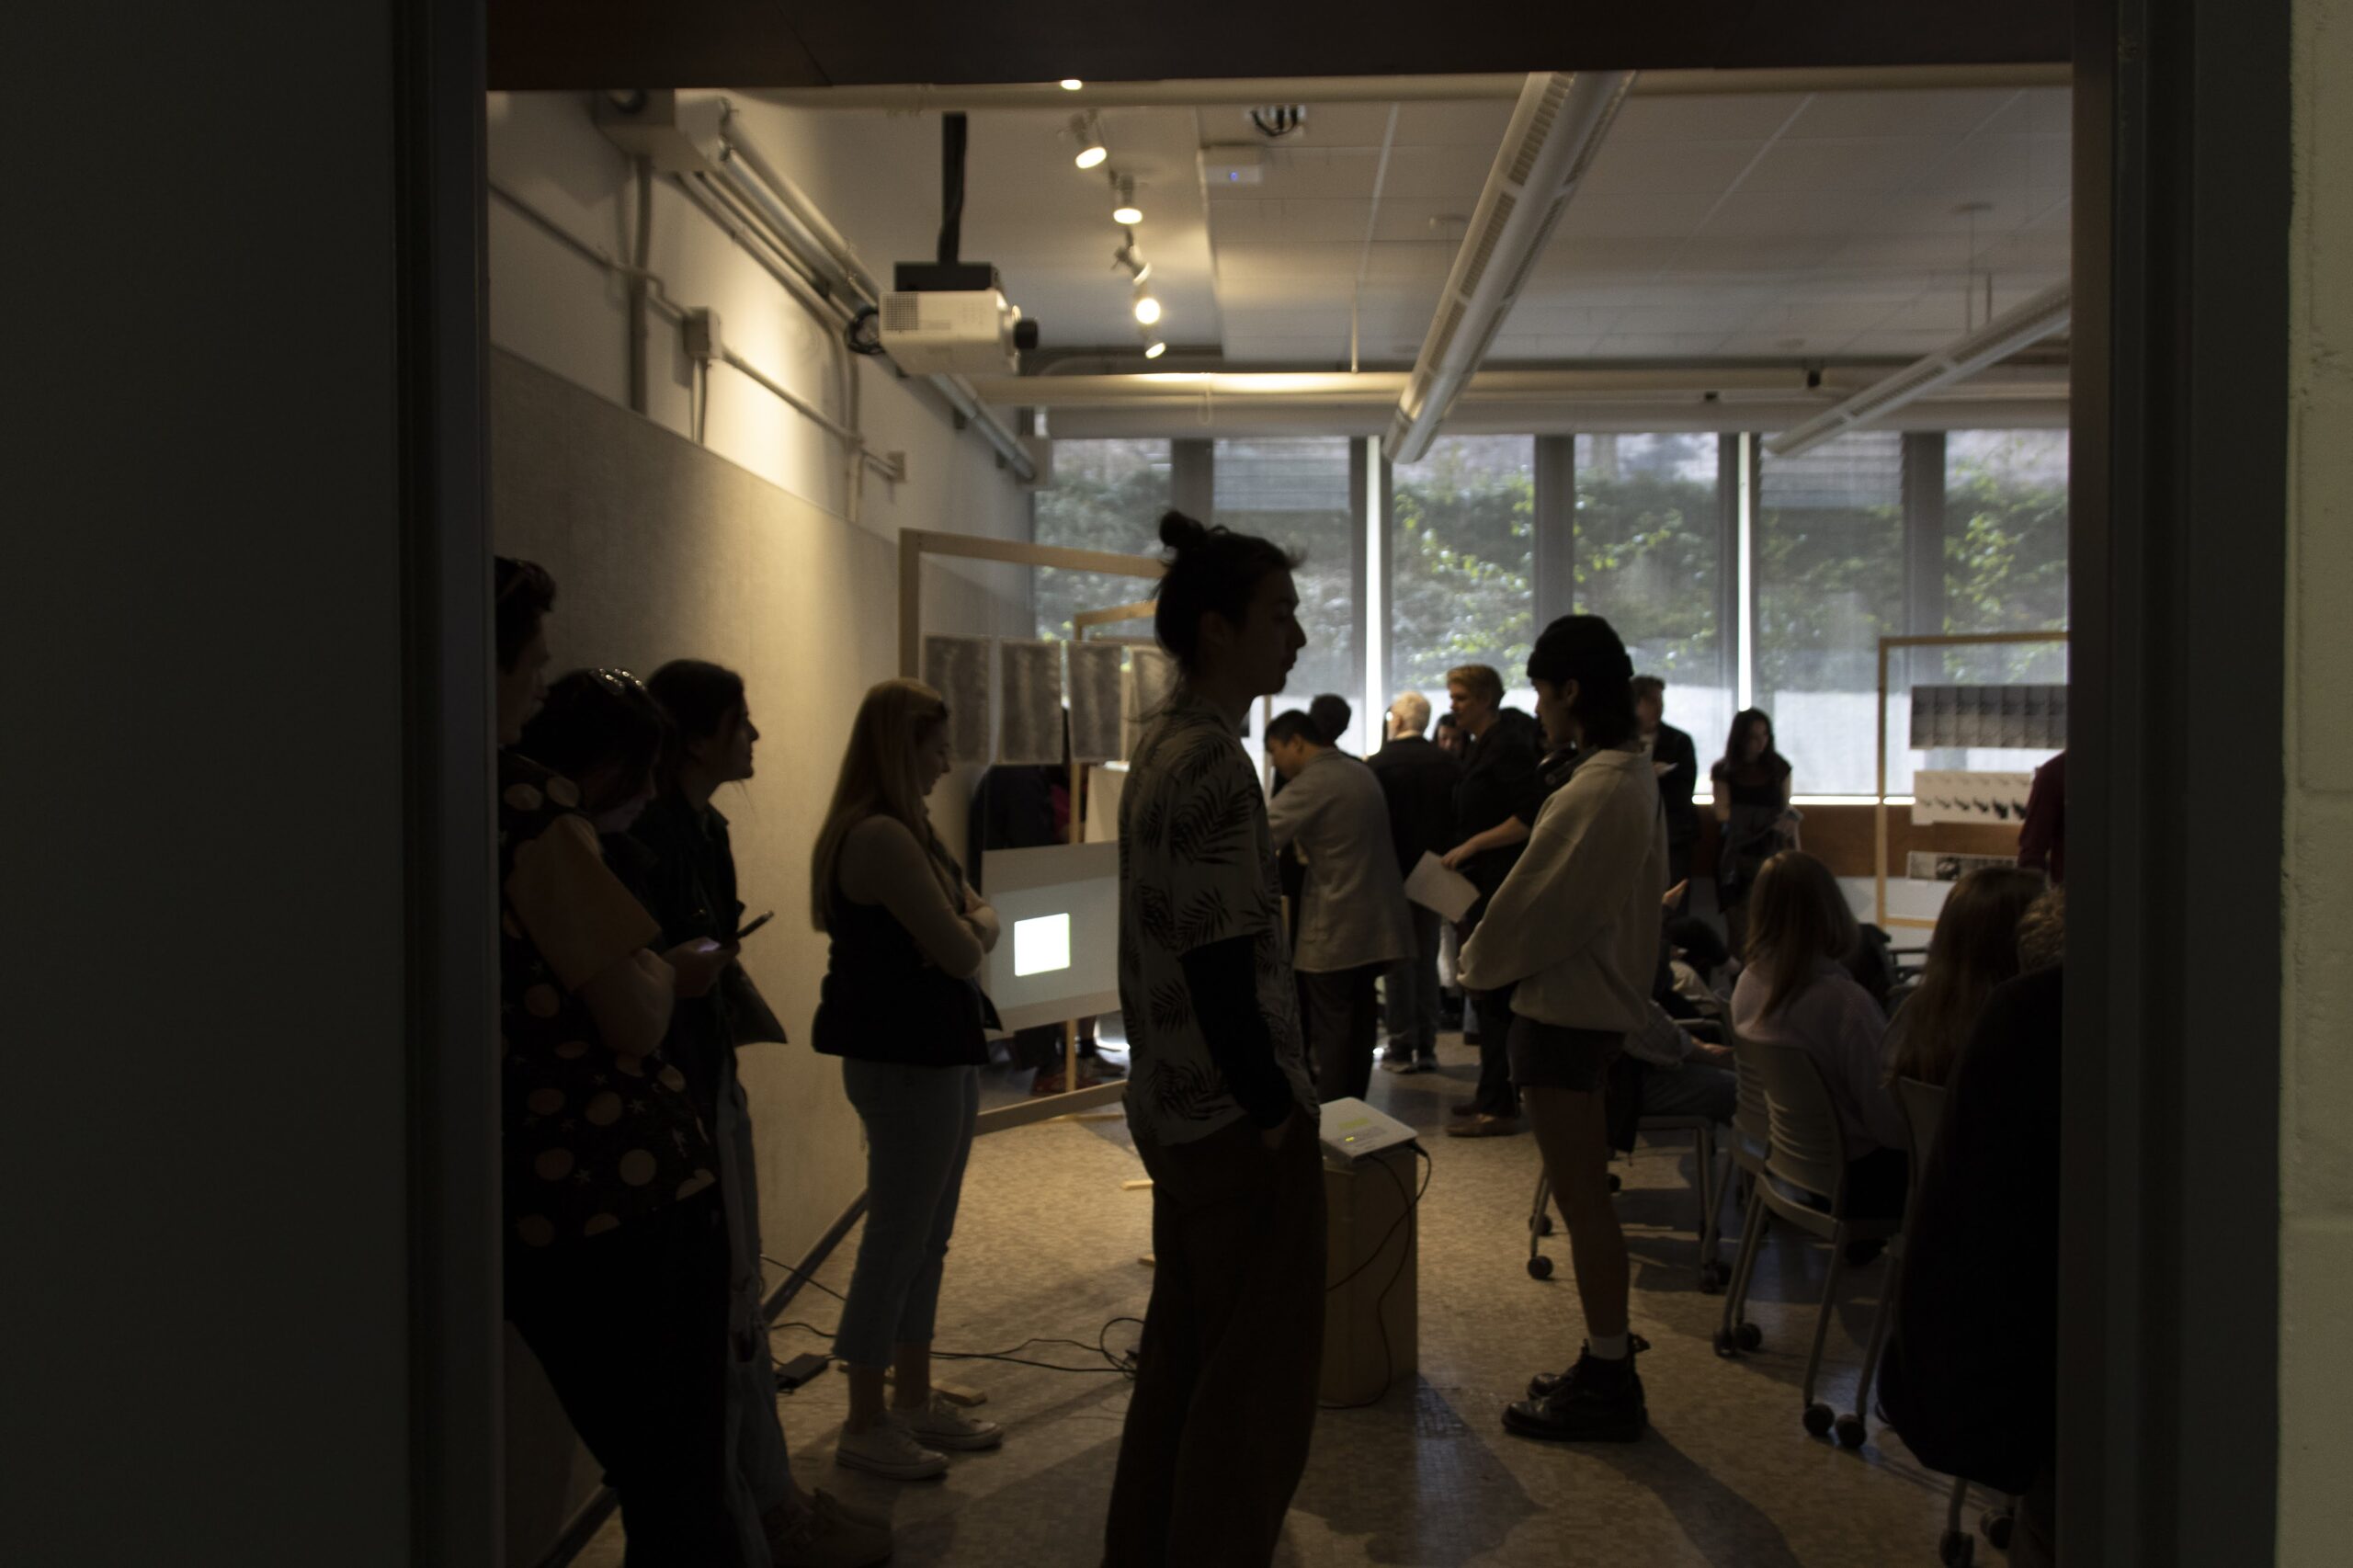 Students gathered to view a graduate project installation